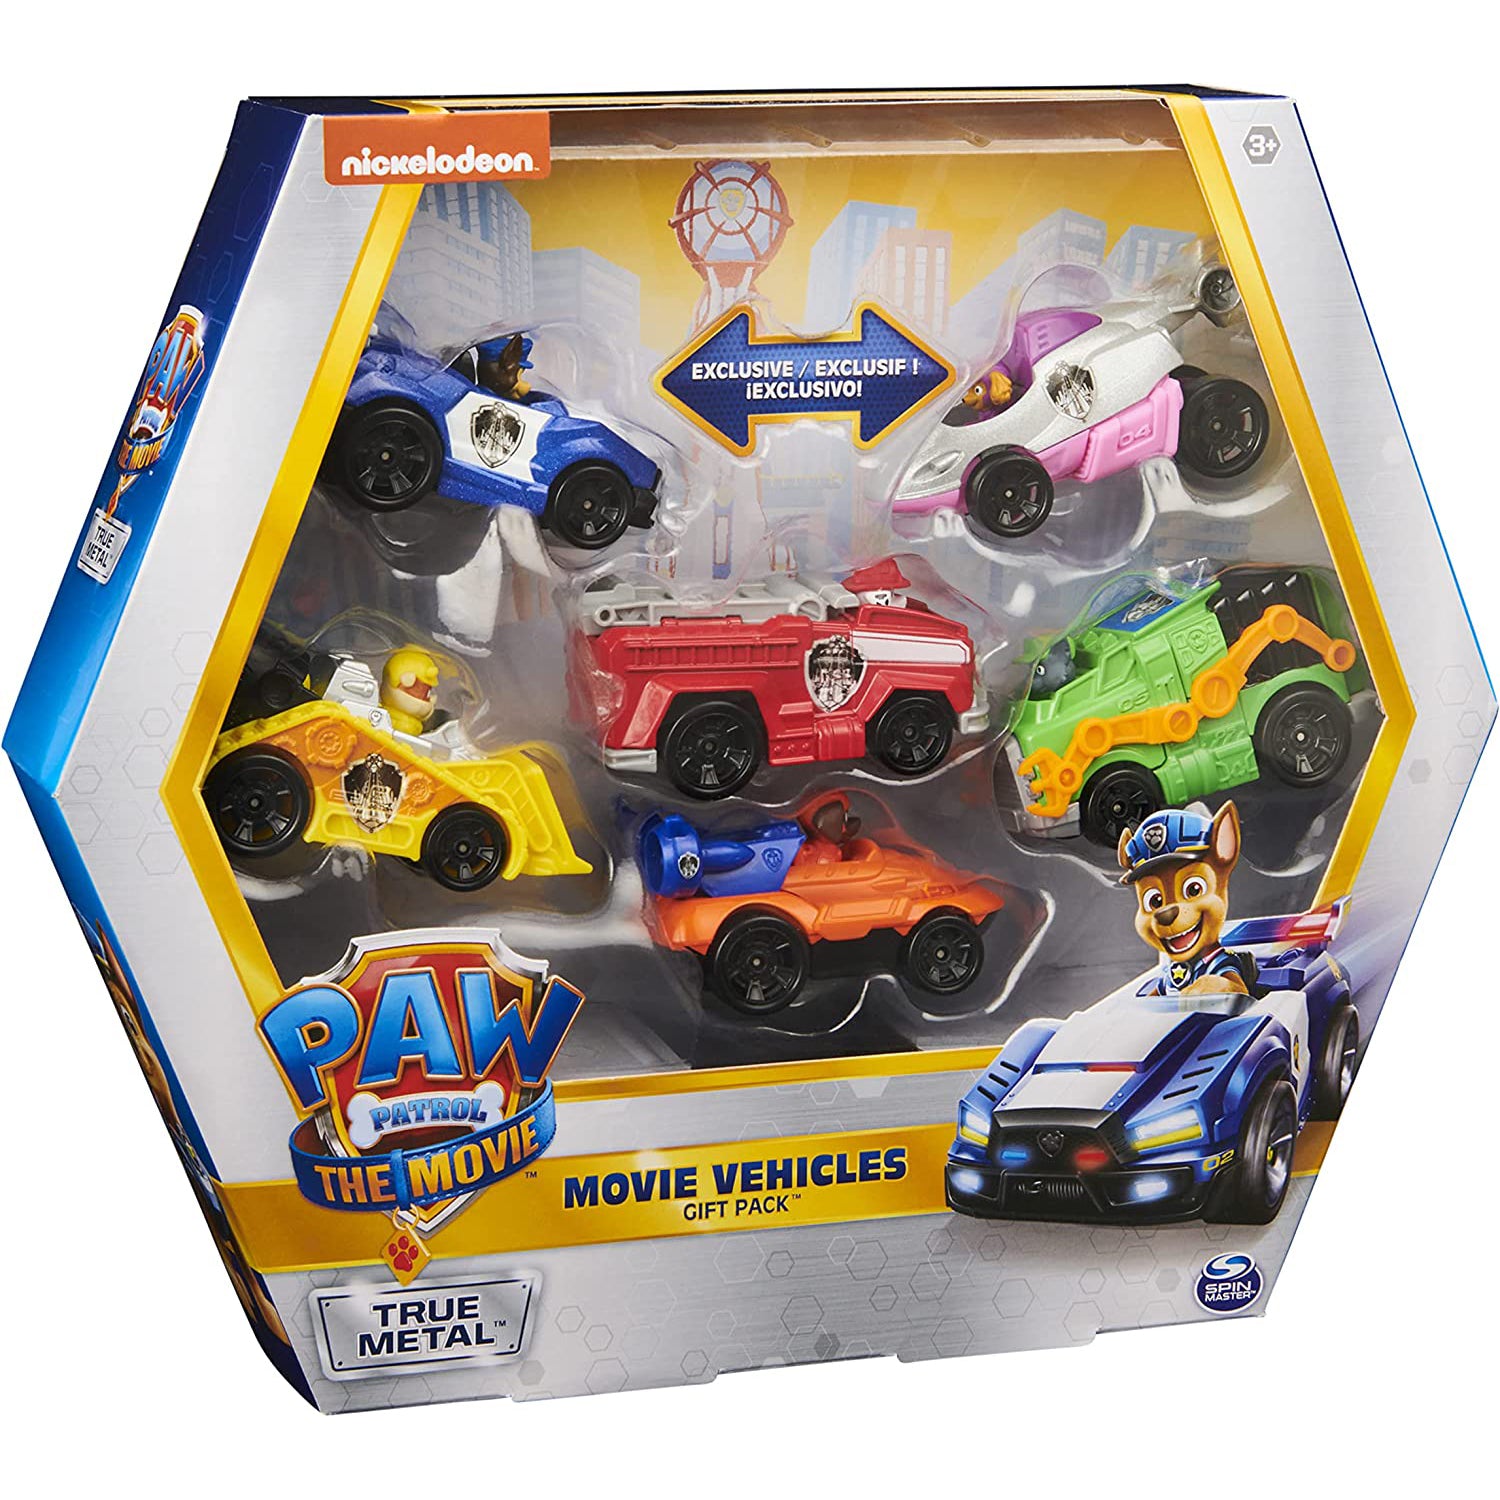 PAW Patrol True Metal Movie Gift Pack of 6 Collectible Die-Cast Toy Cars